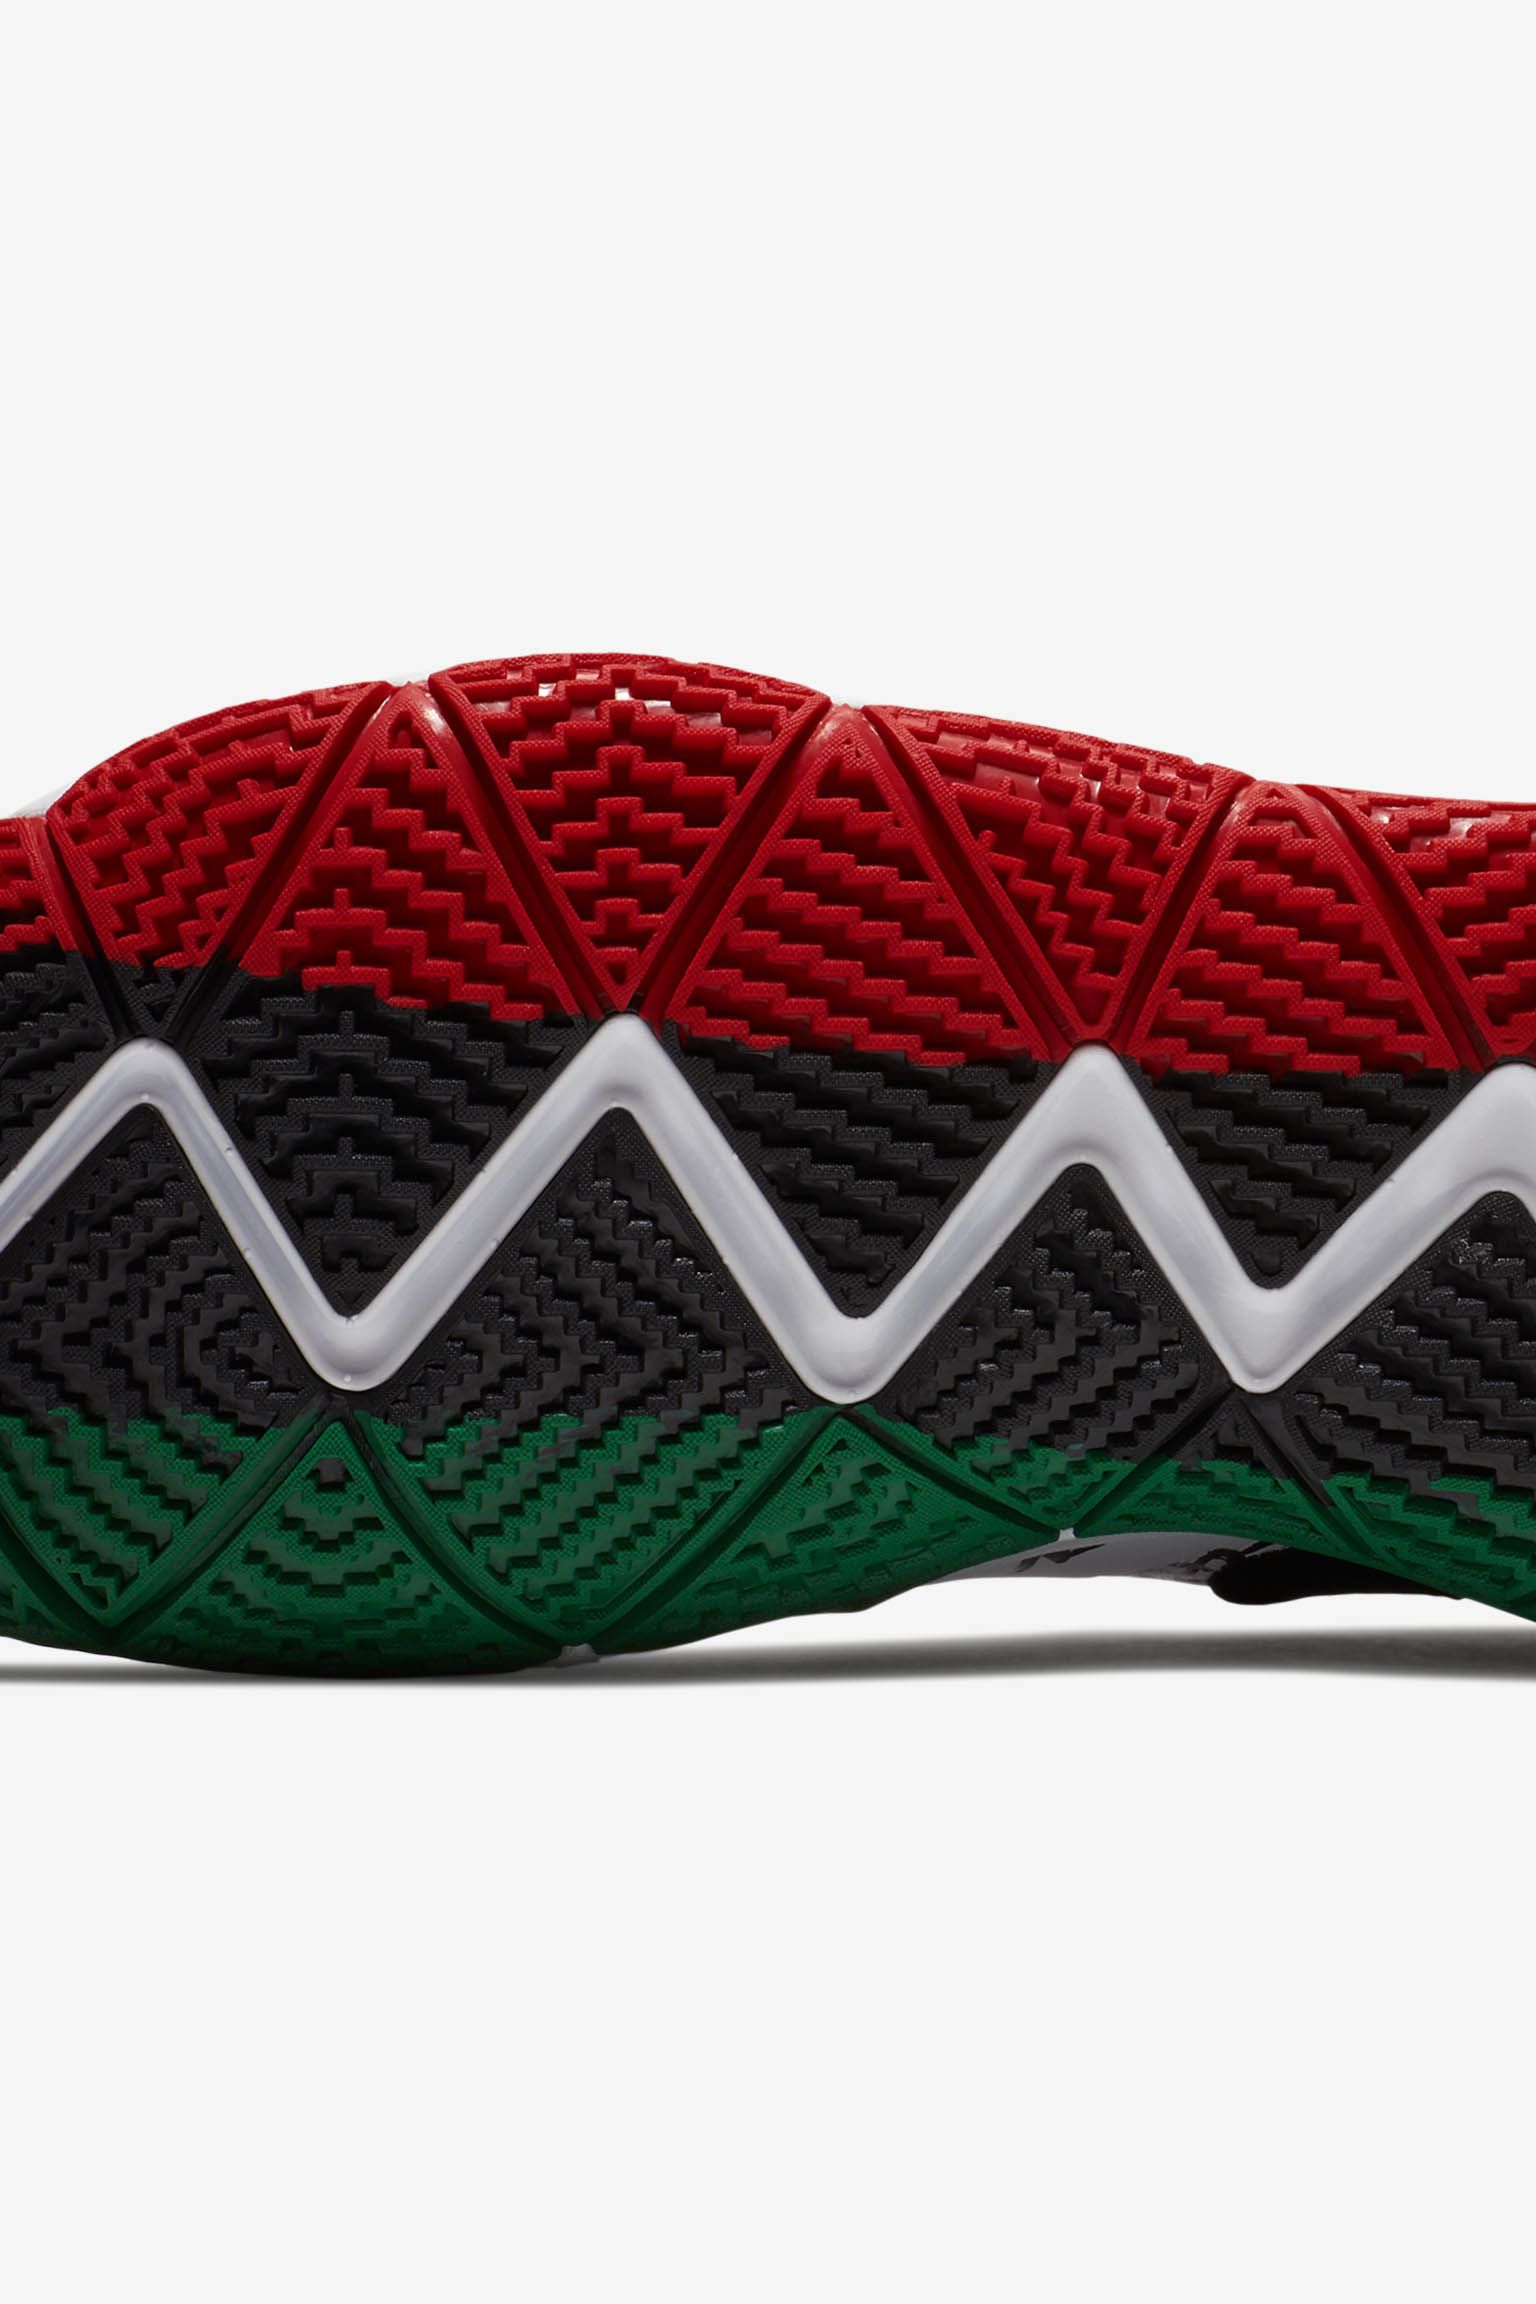 Nike Kyrie 4 'BHM' 2018 Release Date. Nike SNKRS